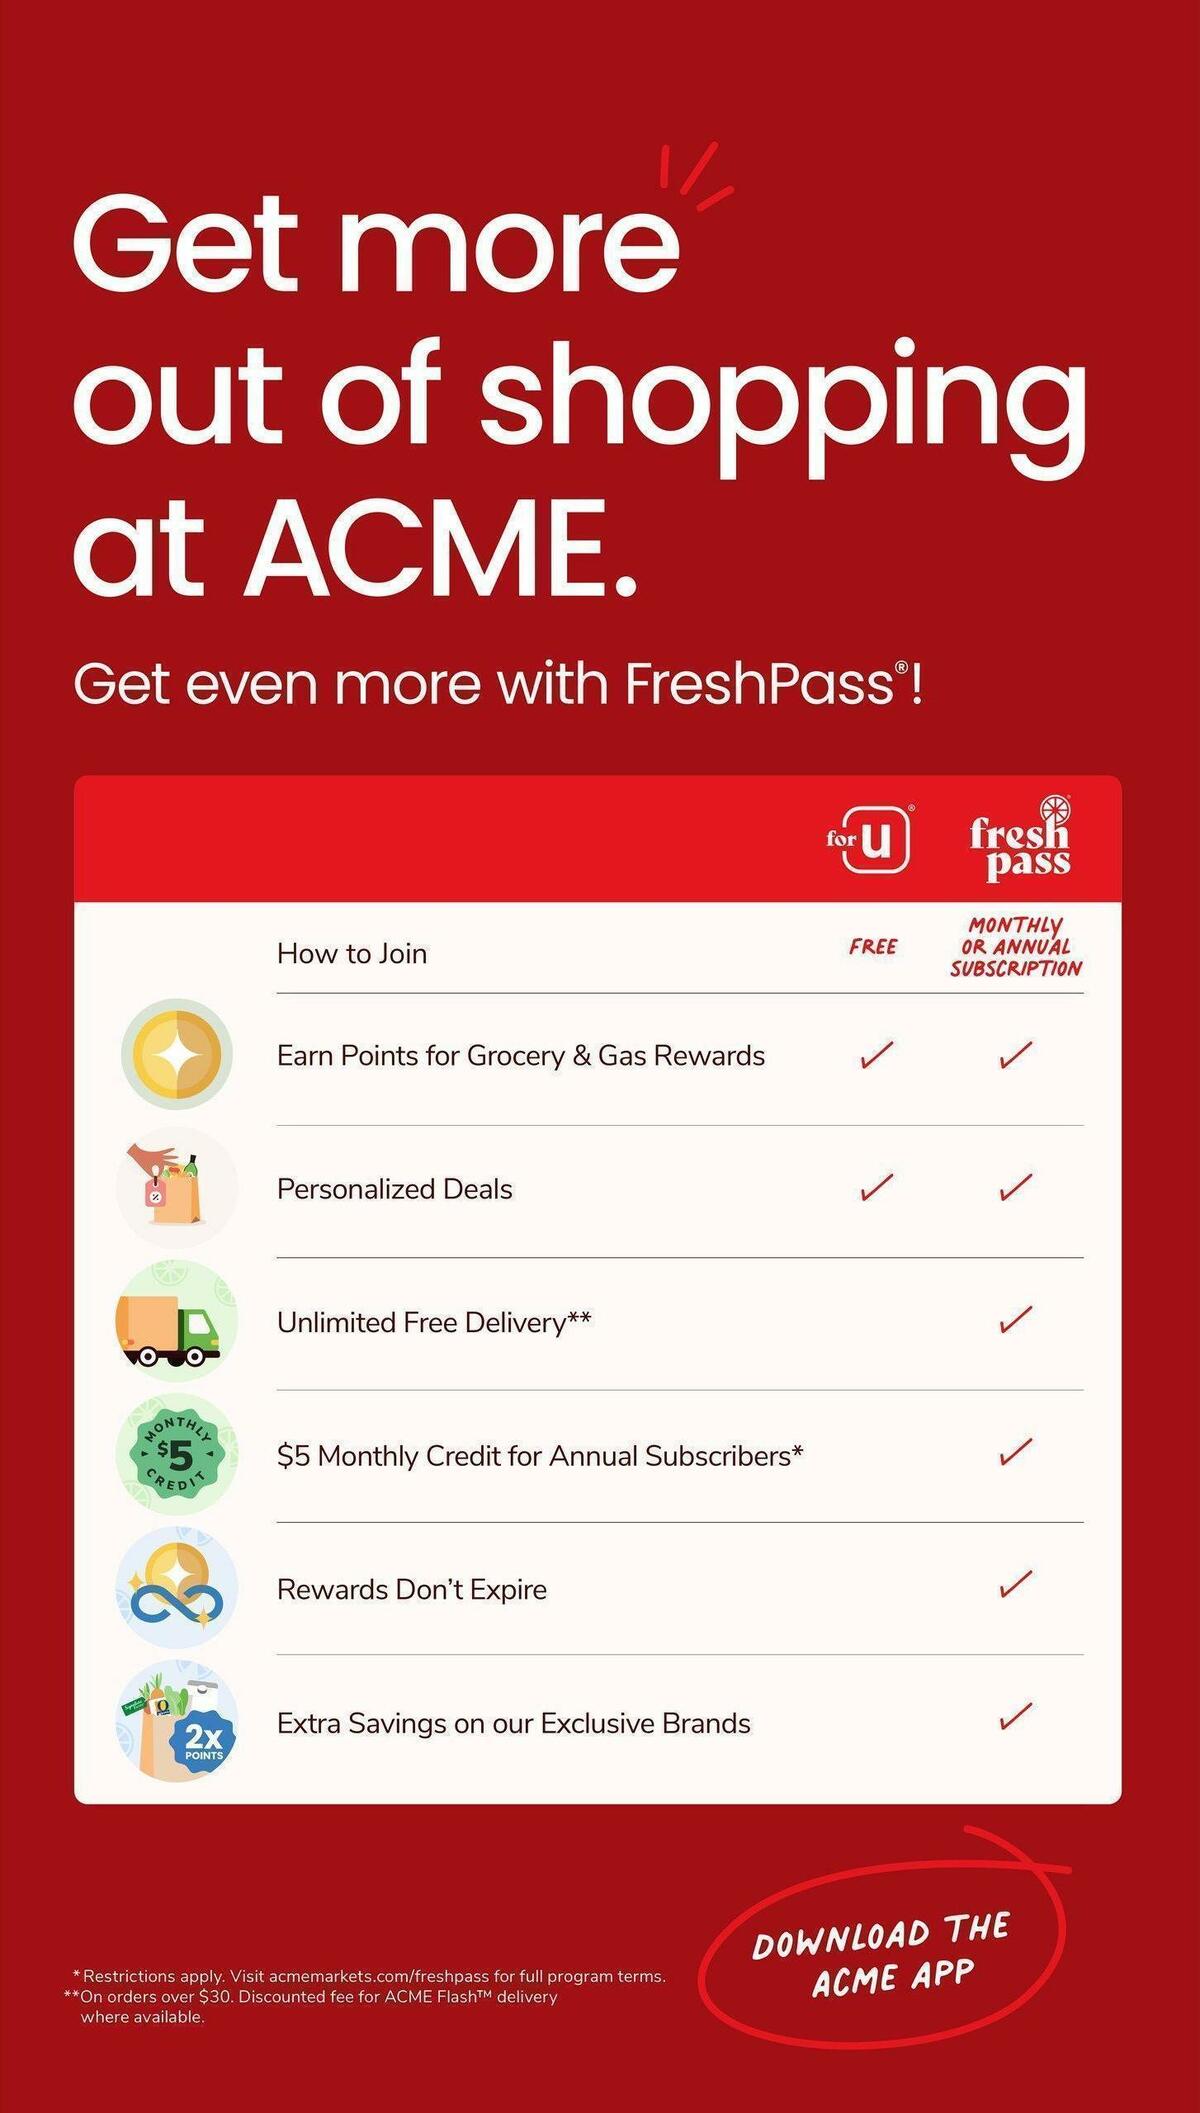 ACME Markets Weekly Ad from April 7